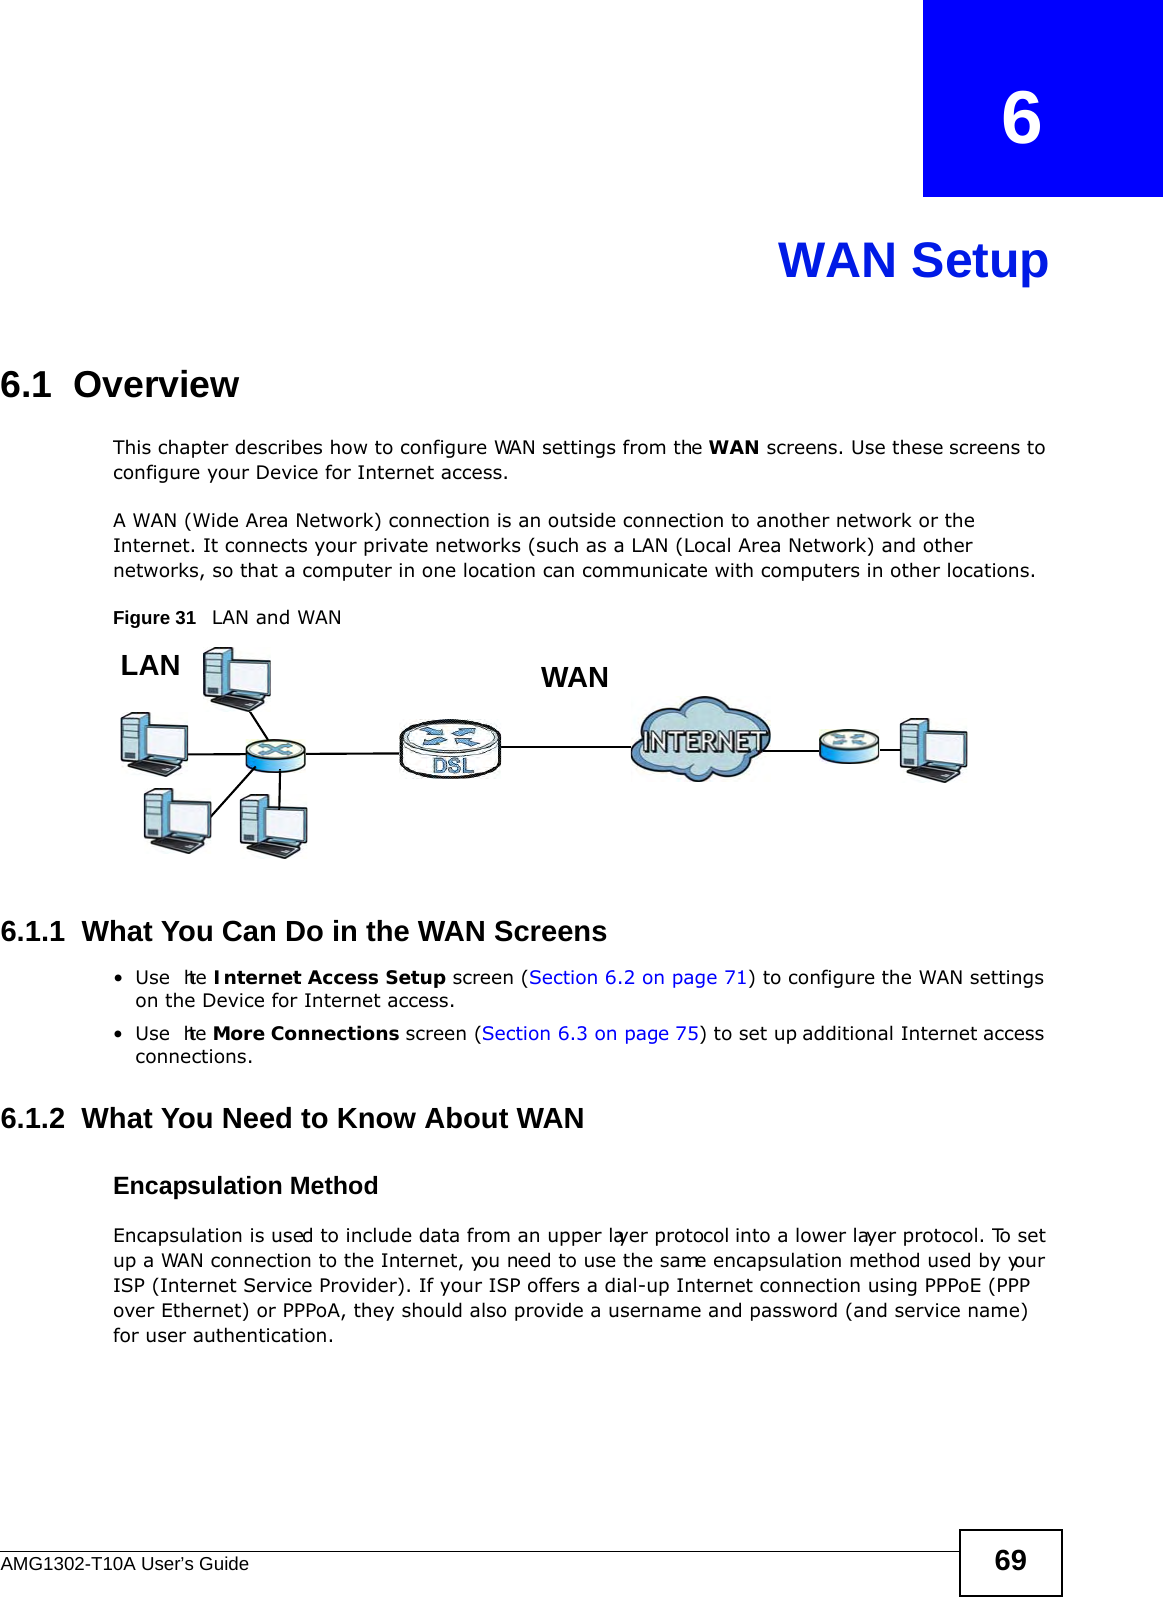 AMG1302-T10A User’s Guide 69CHAPTER   6WAN Setup6.1  OverviewThis chapter describes how to configure WAN settings from the WAN screens. Use these screens to configure your Device for Internet access.A WAN (Wide Area Network) connection is an outside connection to another network or the Internet. It connects your private networks (such as a LAN (Local Area Network) and other networks, so that a computer in one location can communicate with computers in other locations.Figure 31   LAN and WAN6.1.1  What You Can Do in the WAN Screens•Use  the Internet Access Setup screen (Section 6.2 on page 71) to configure the WAN settings on the Device for Internet access.•Use  the More Connections screen (Section 6.3 on page 75) to set up additional Internet access connections.6.1.2  What You Need to Know About WANEncapsulation MethodEncapsulation is used to include data from an upper layer protocol into a lower layer protocol. To set up a WAN connection to the Internet, you need to use the same encapsulation method used by your ISP (Internet Service Provider). If your ISP offers a dial-up Internet connection using PPPoE (PPP over Ethernet) or PPPoA, they should also provide a username and password (and service name) for user authentication.WANLAN